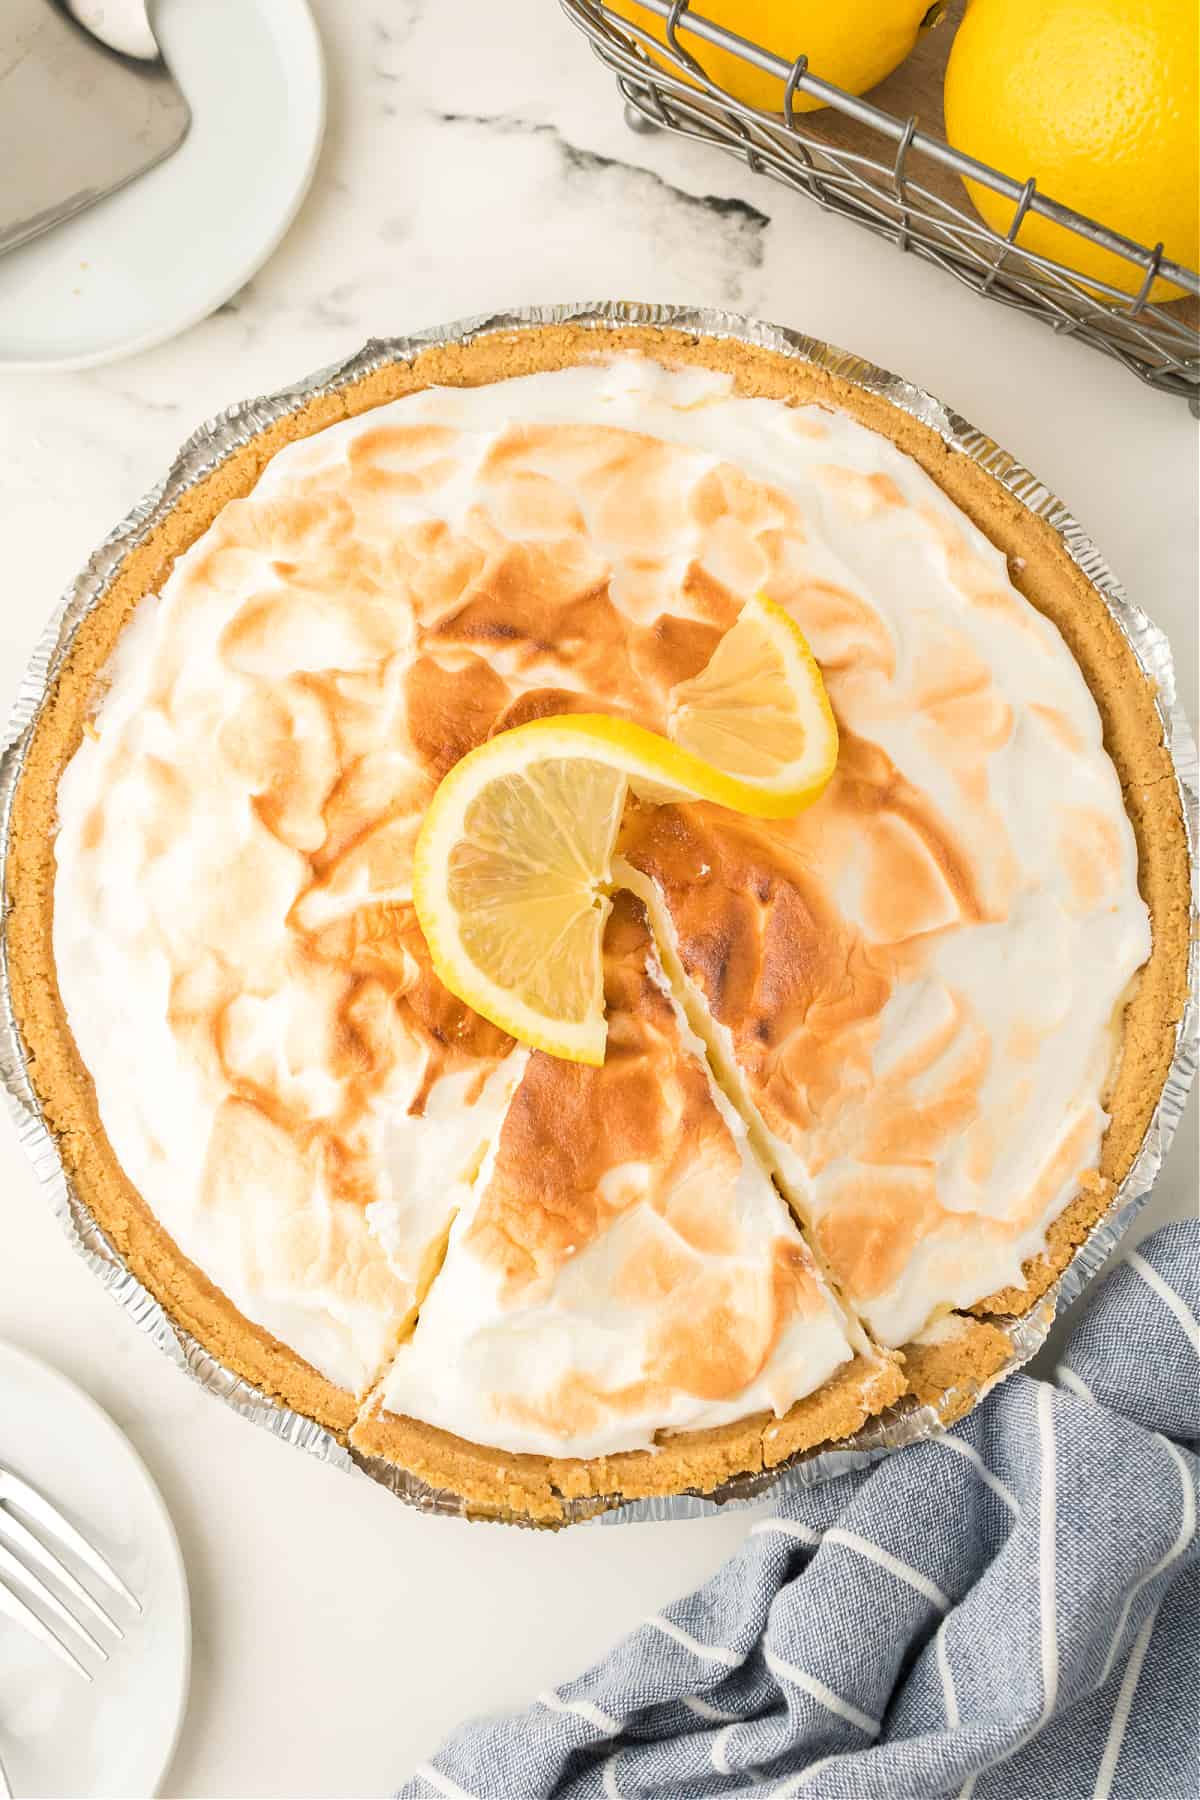 A plate of food on a table, with Lemon and Pie